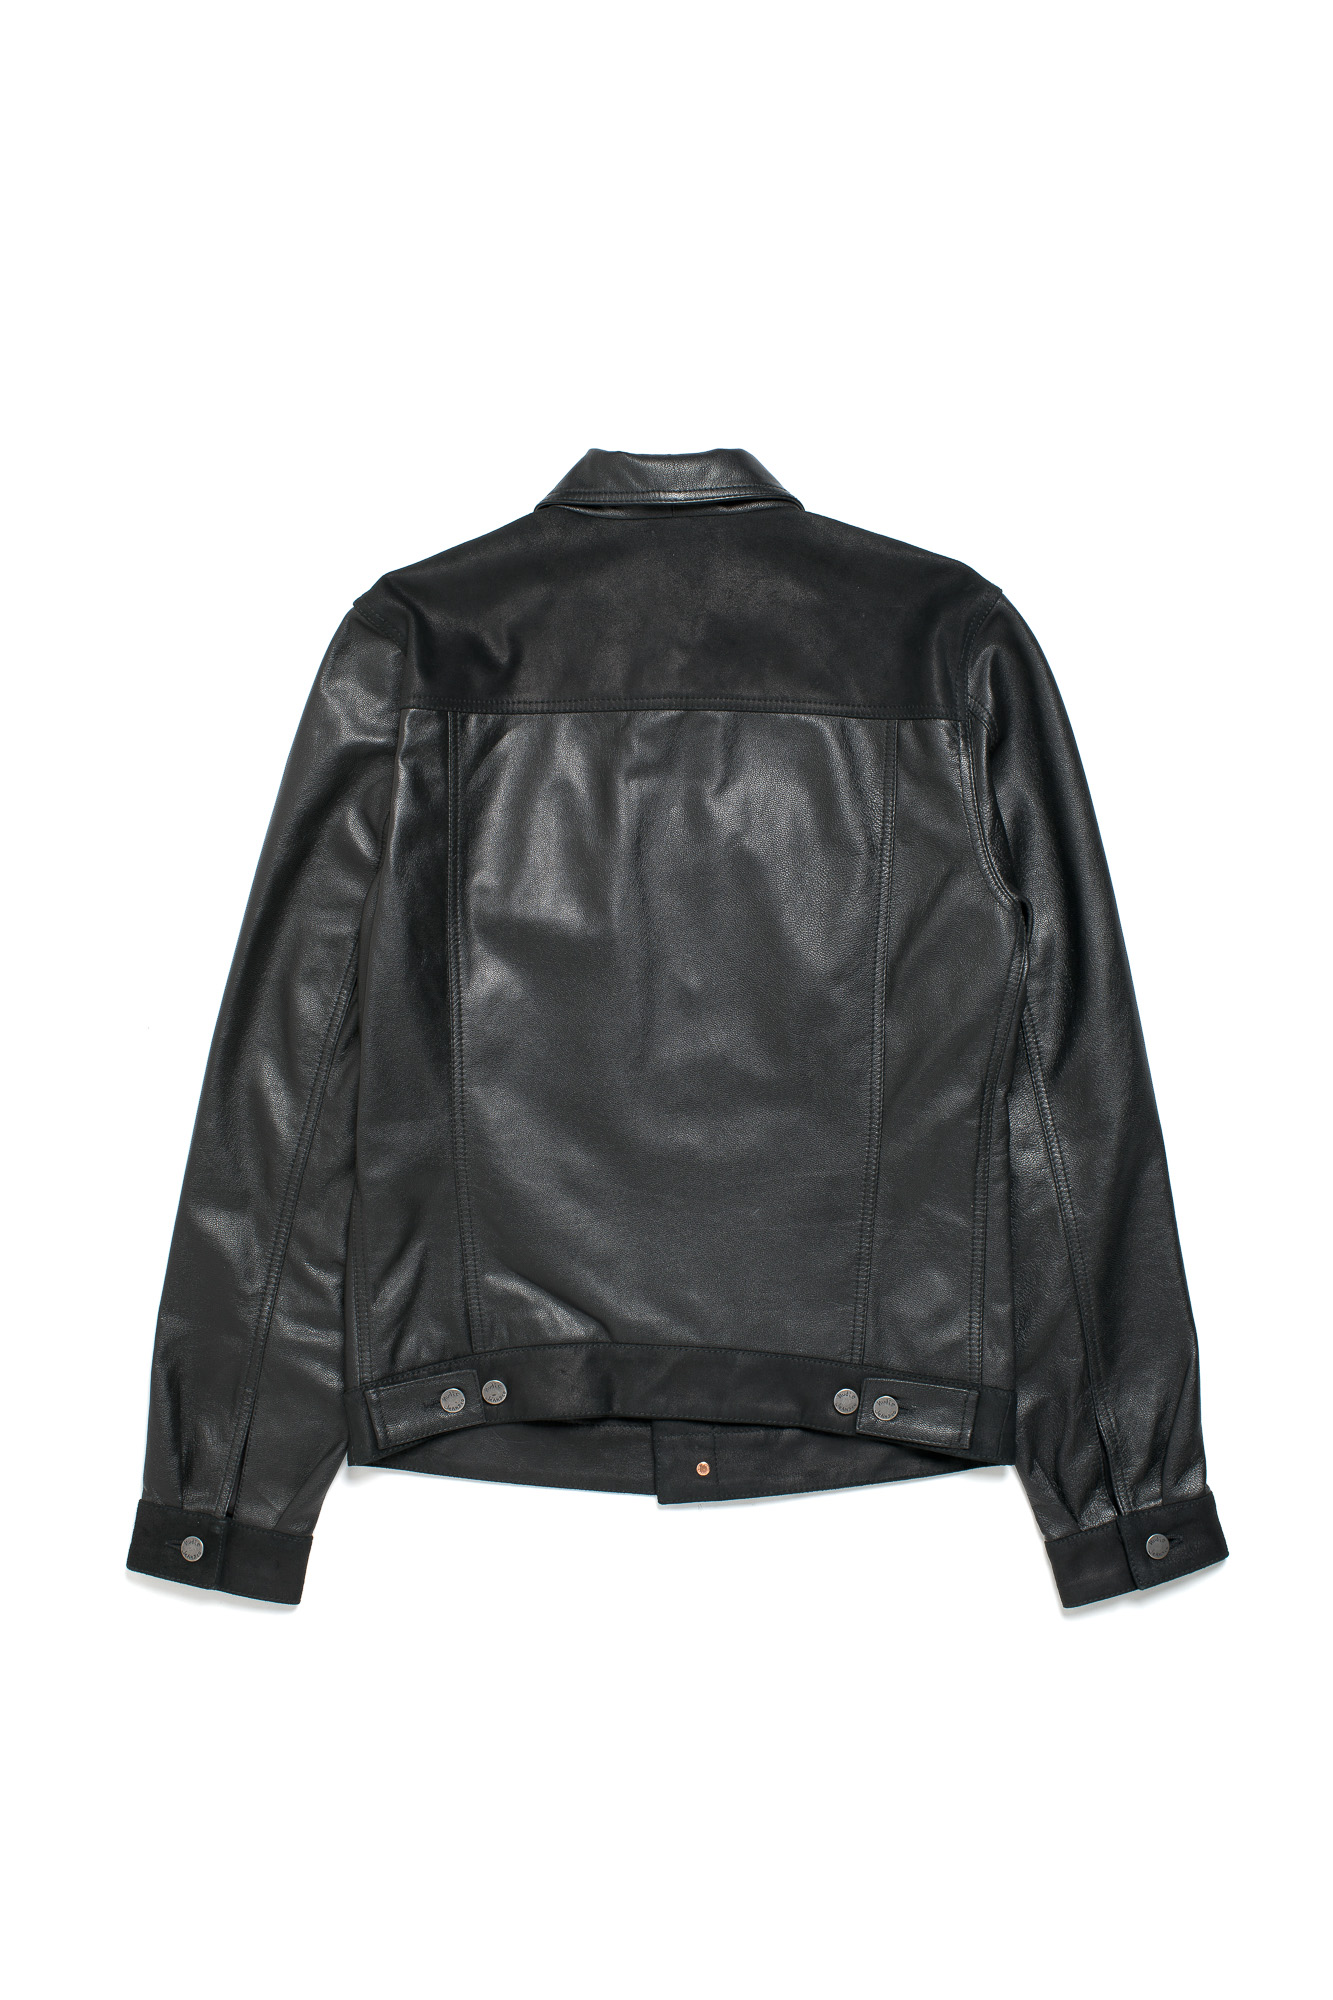 Perry Leather _ Crust Jkt Black 160339 12